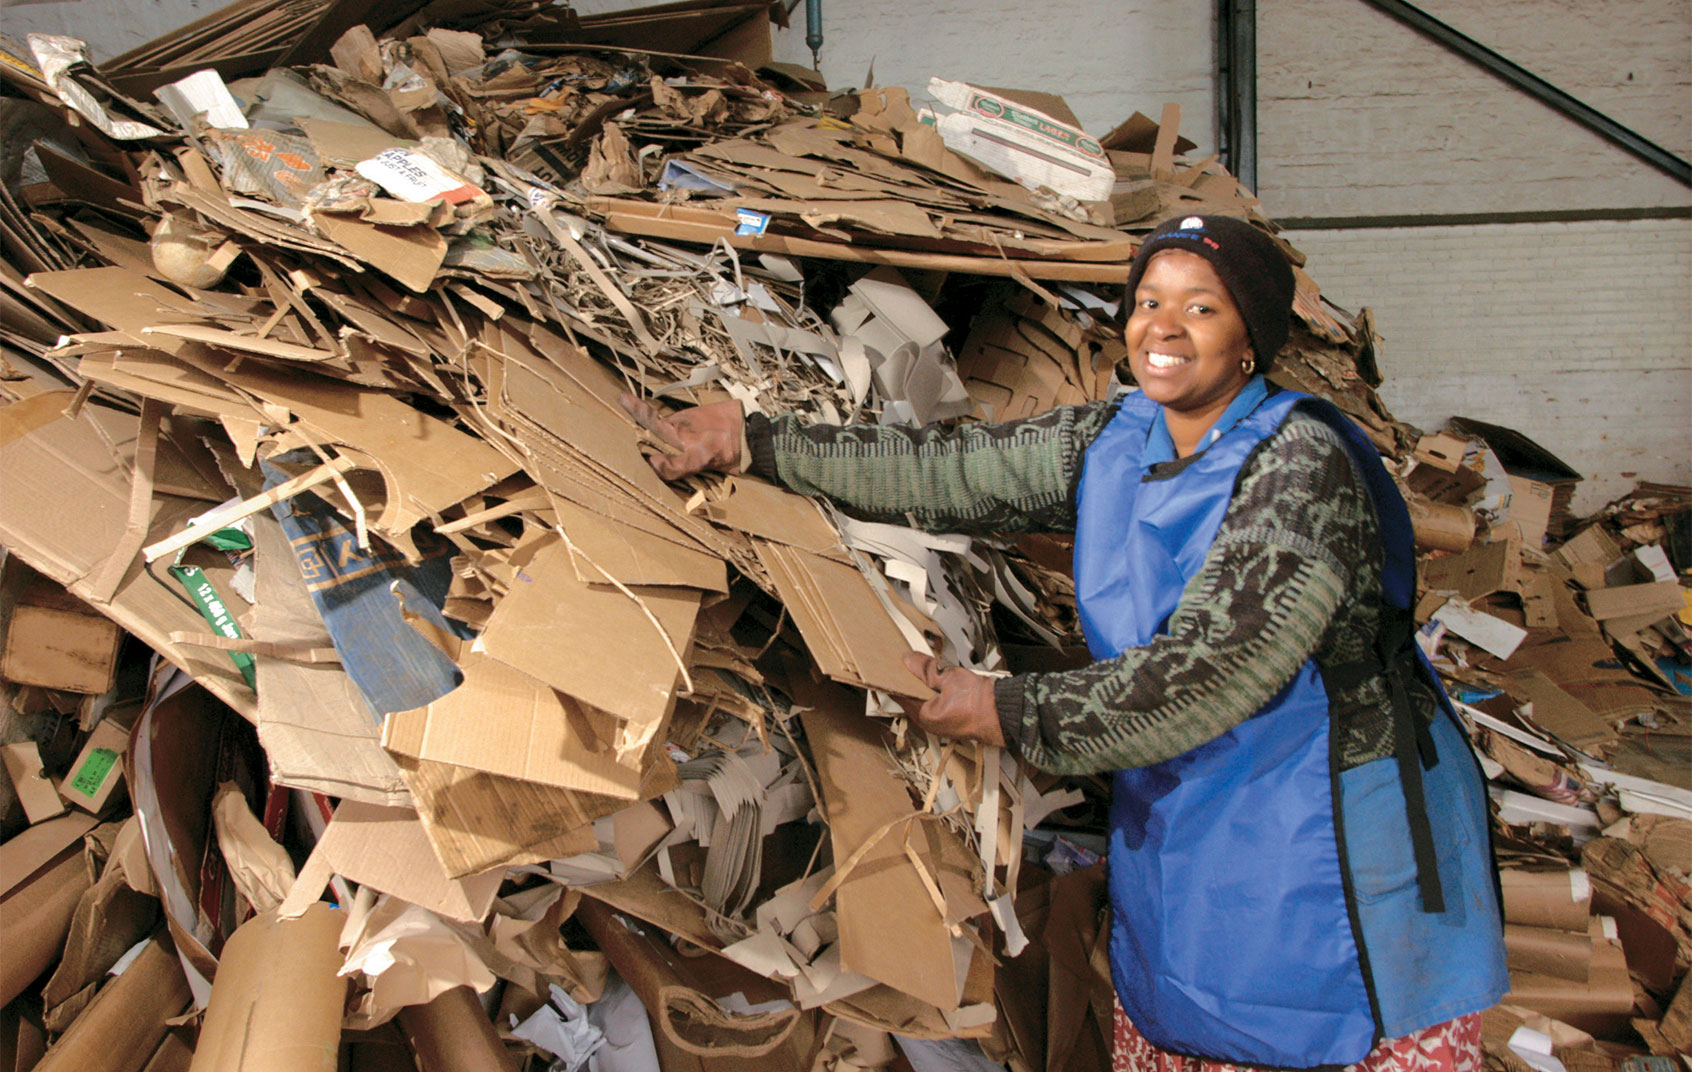 Recycle-your-paper-and-declare-a-war-on-waste-Credit-Sappi-ReFibre